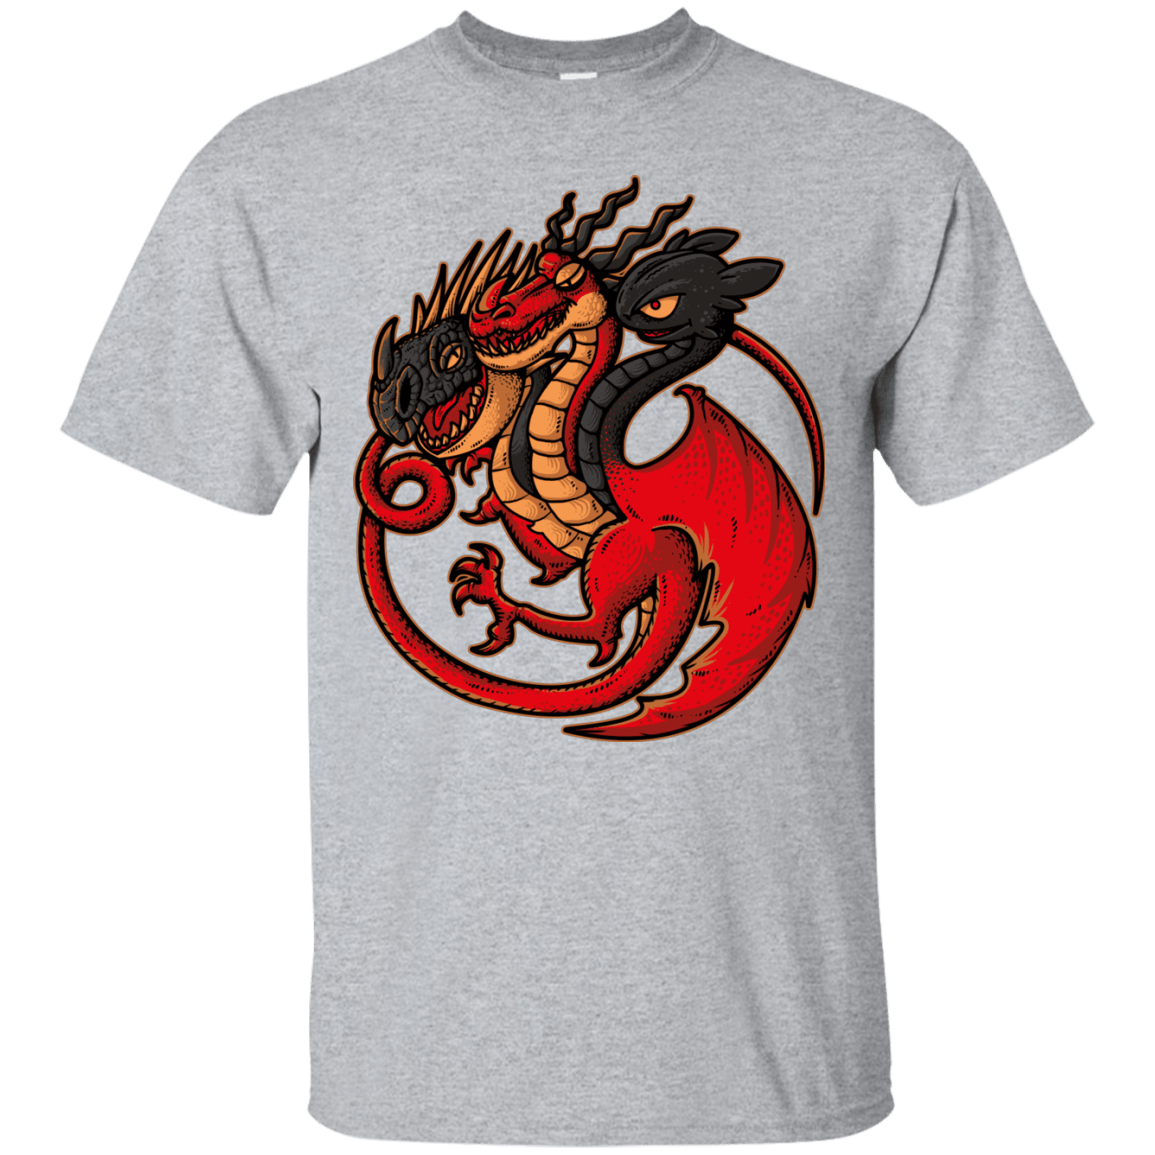 T-Shirts Sport Grey / Small FIRE BLOOD AND TRAINING T-Shirt